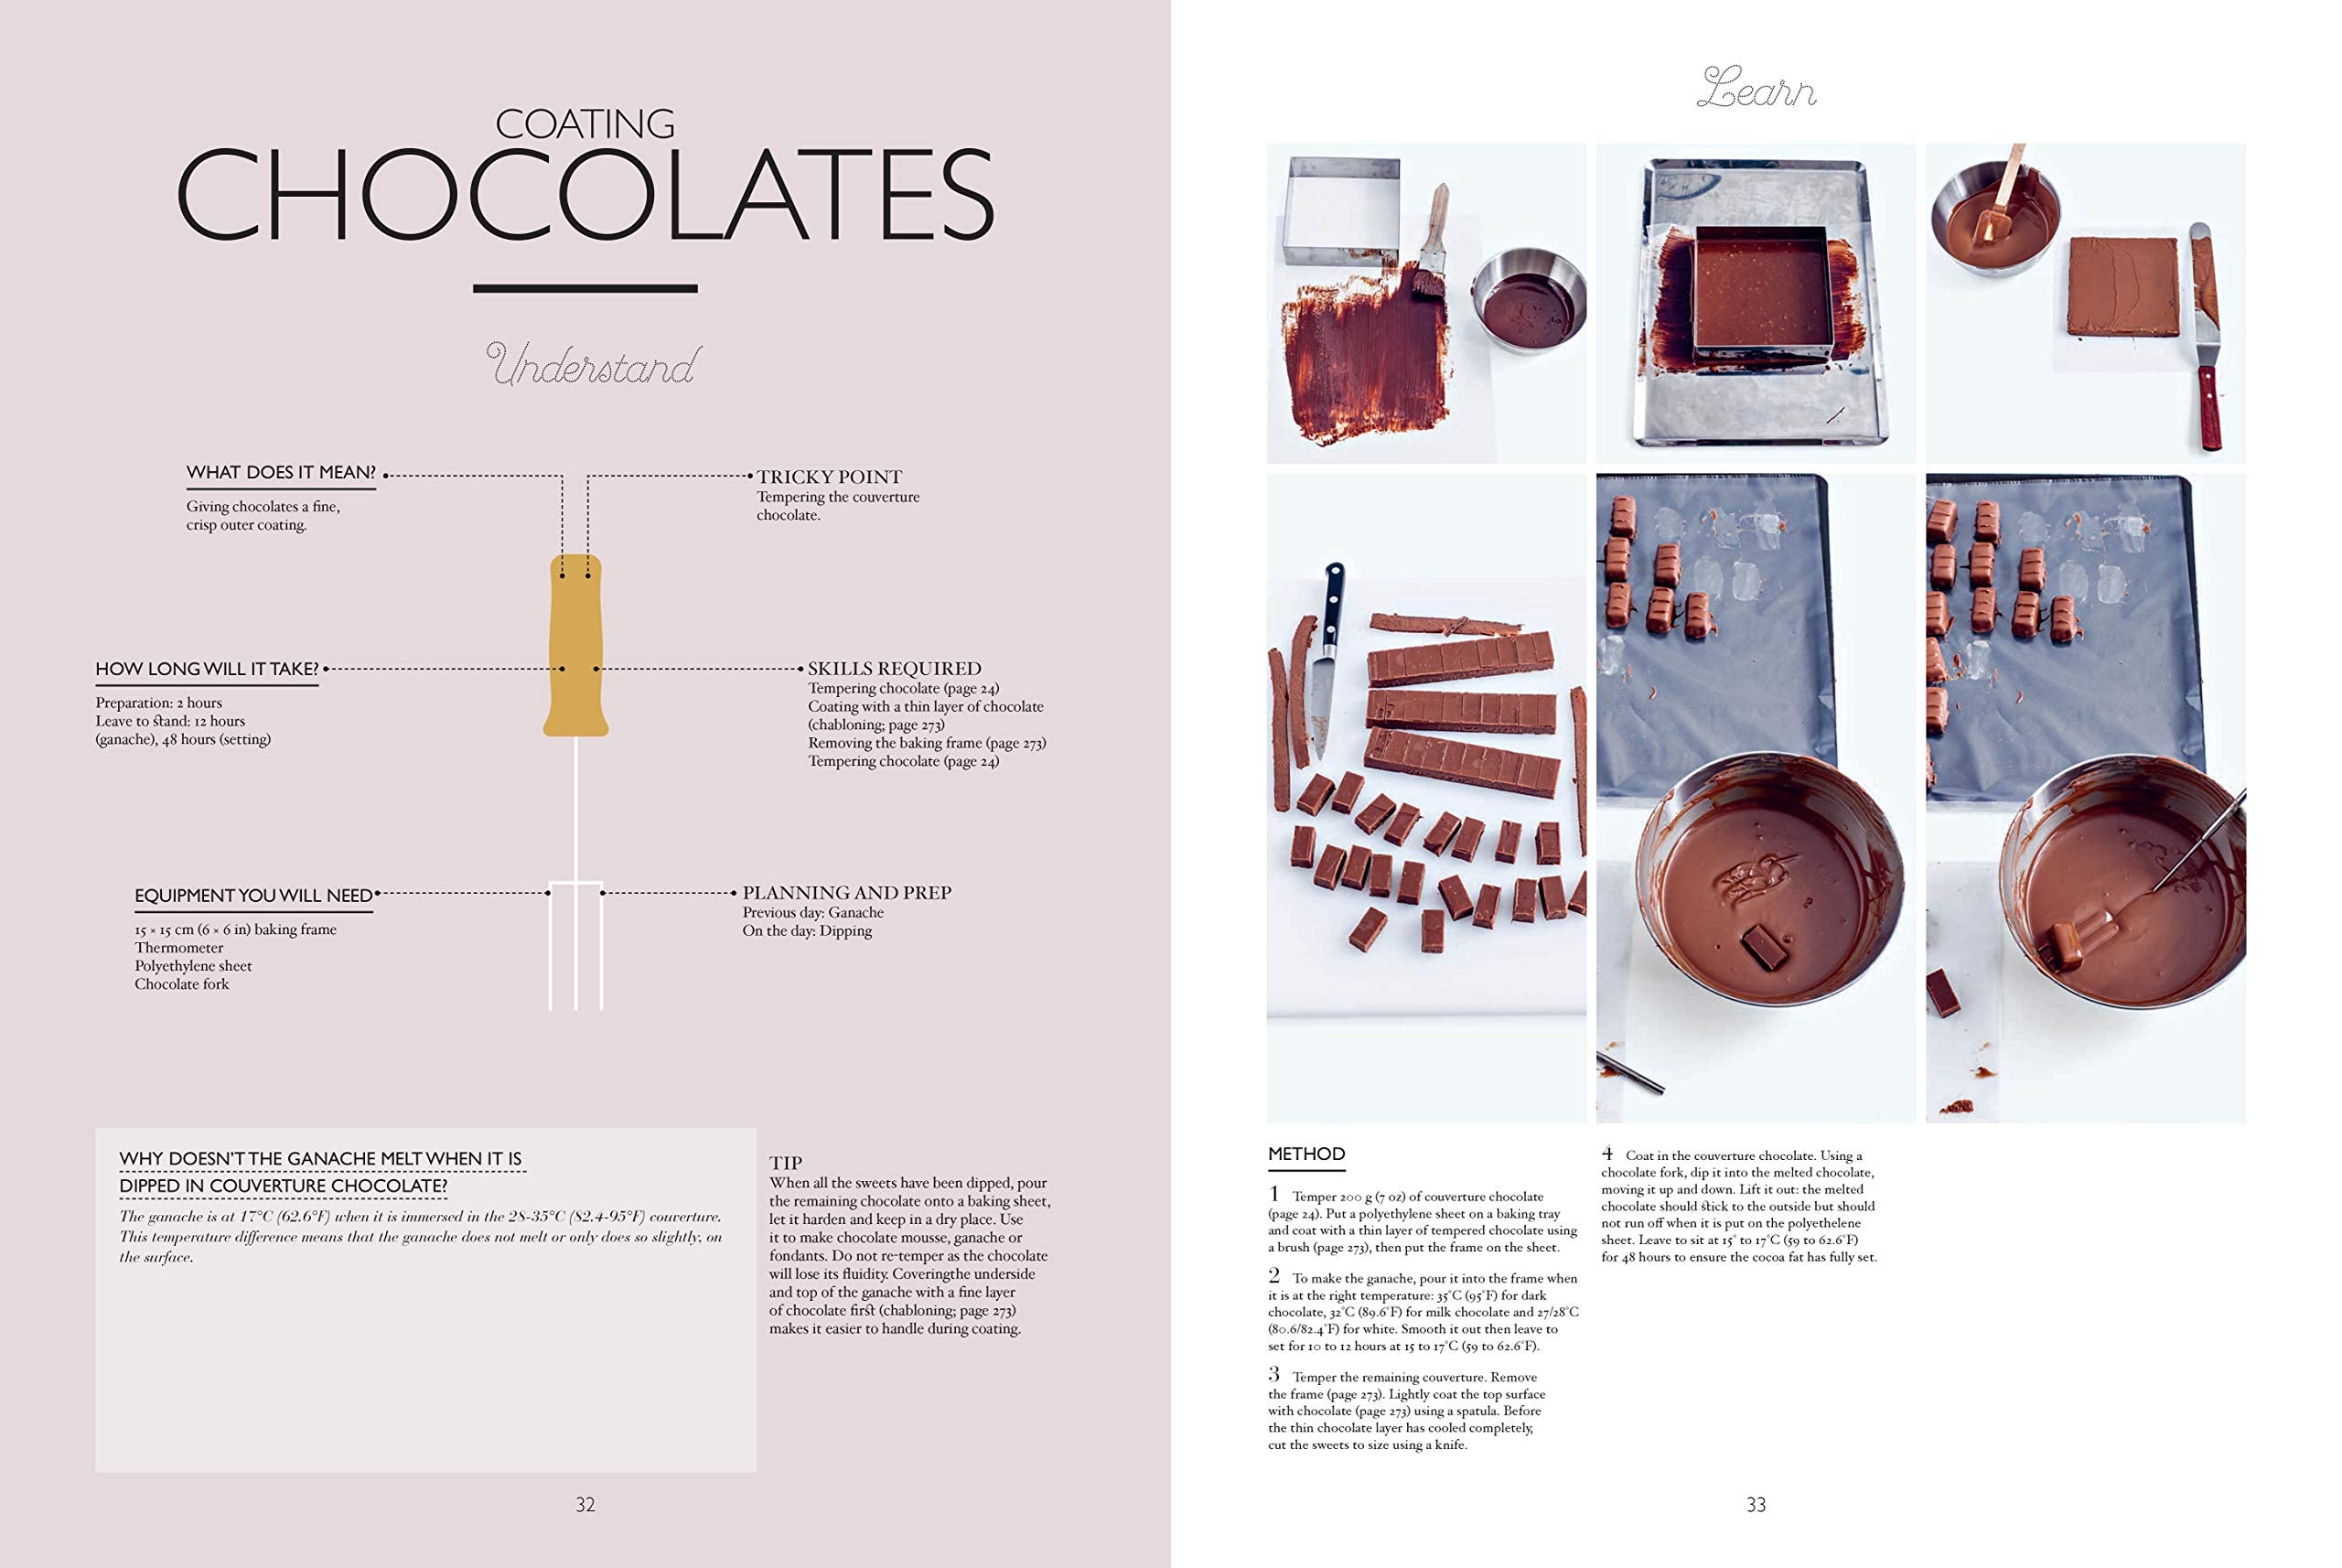 Chocolate Forks, Pastry Supplies and Tools